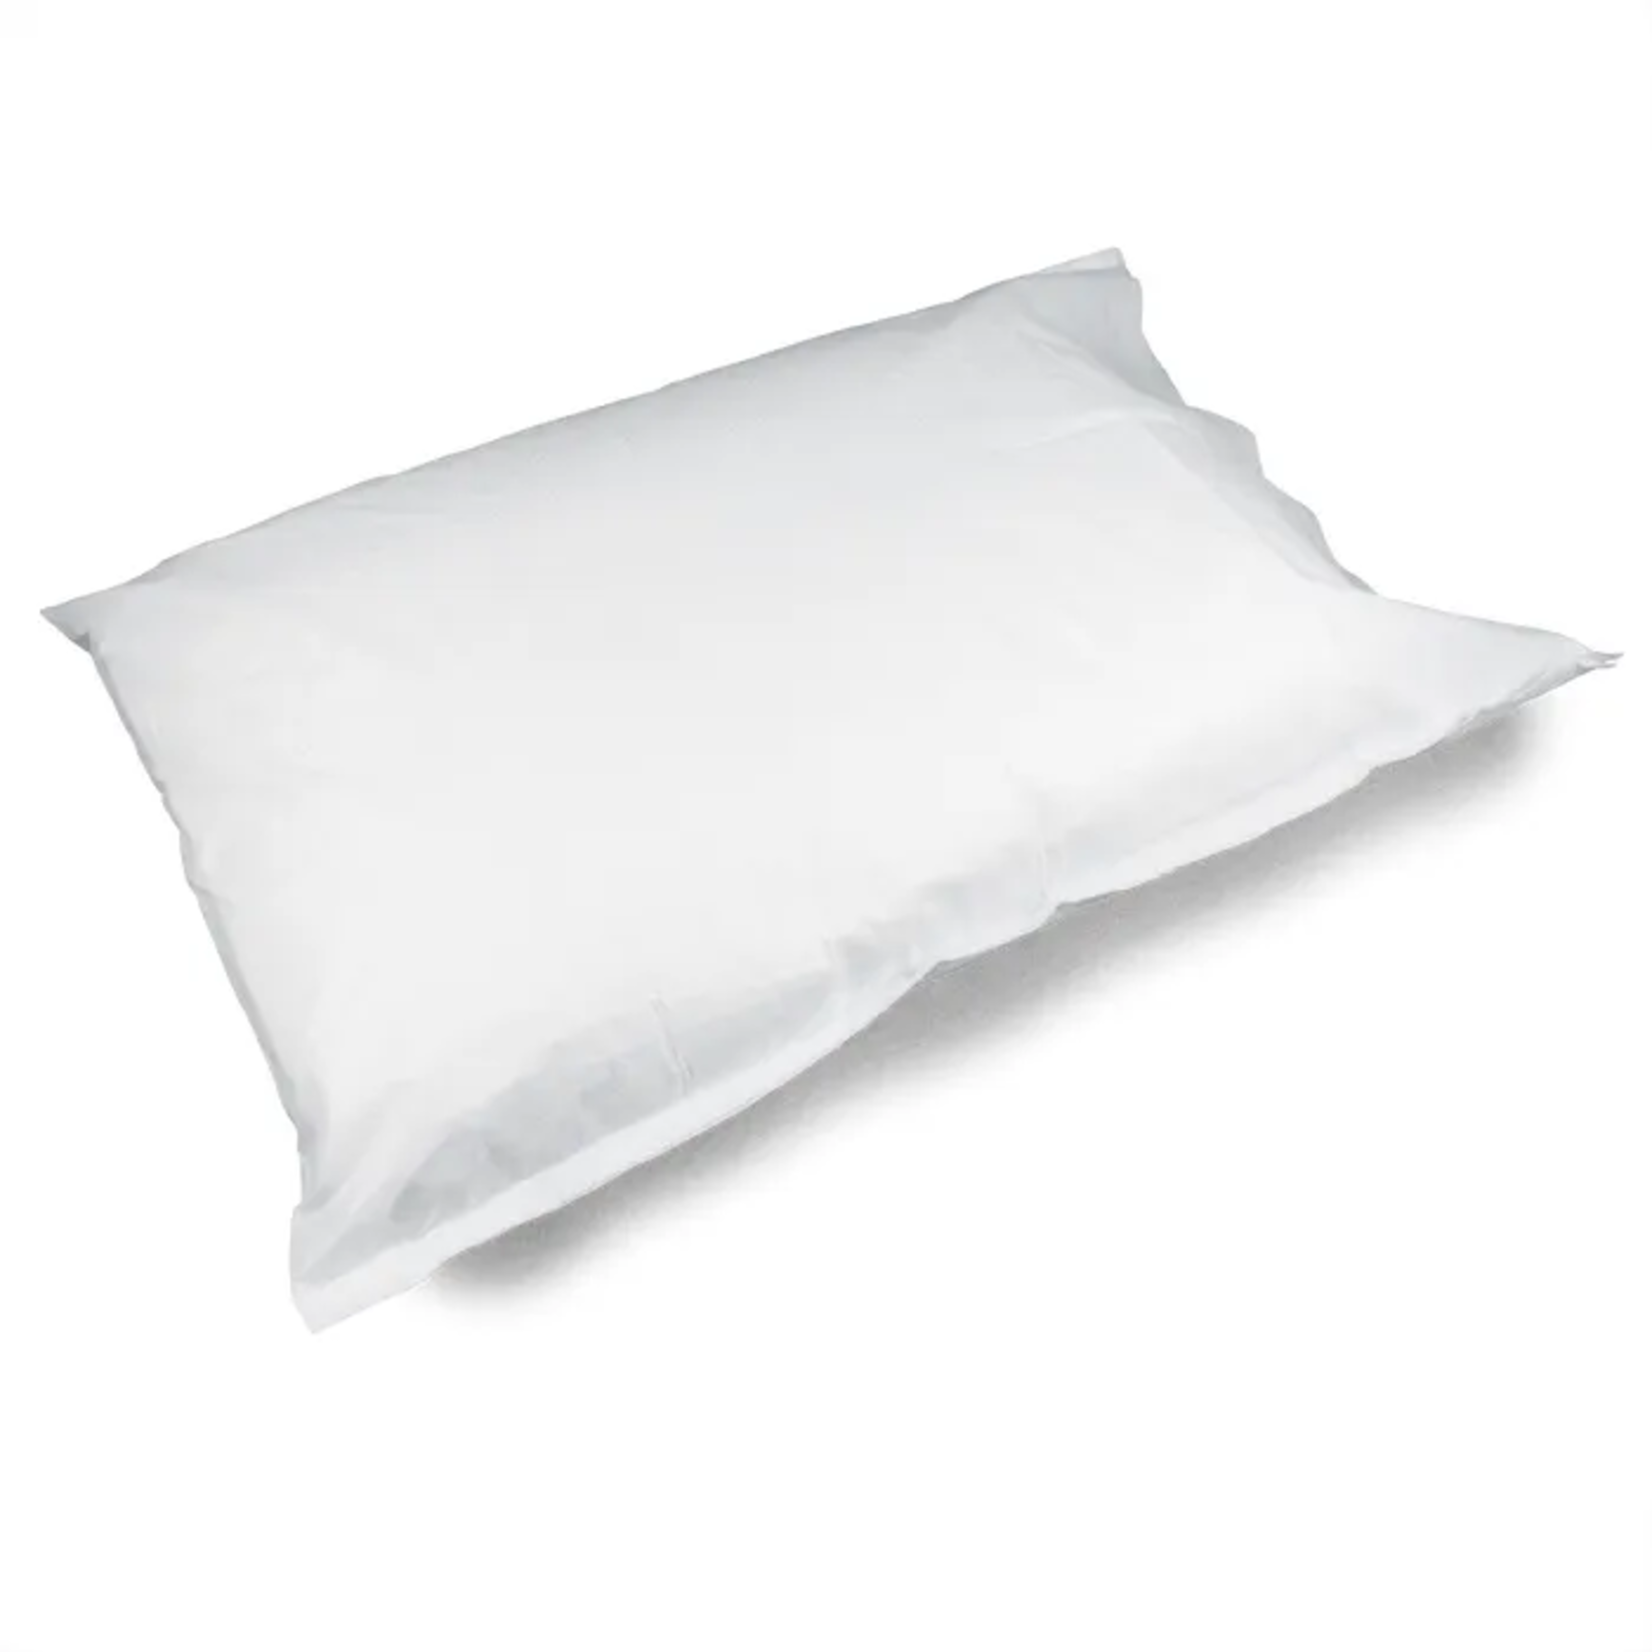 DISPOSABLE  PILLOW CASES  21"x30" WHITE TISSUE/POLY (PACK OF 10)